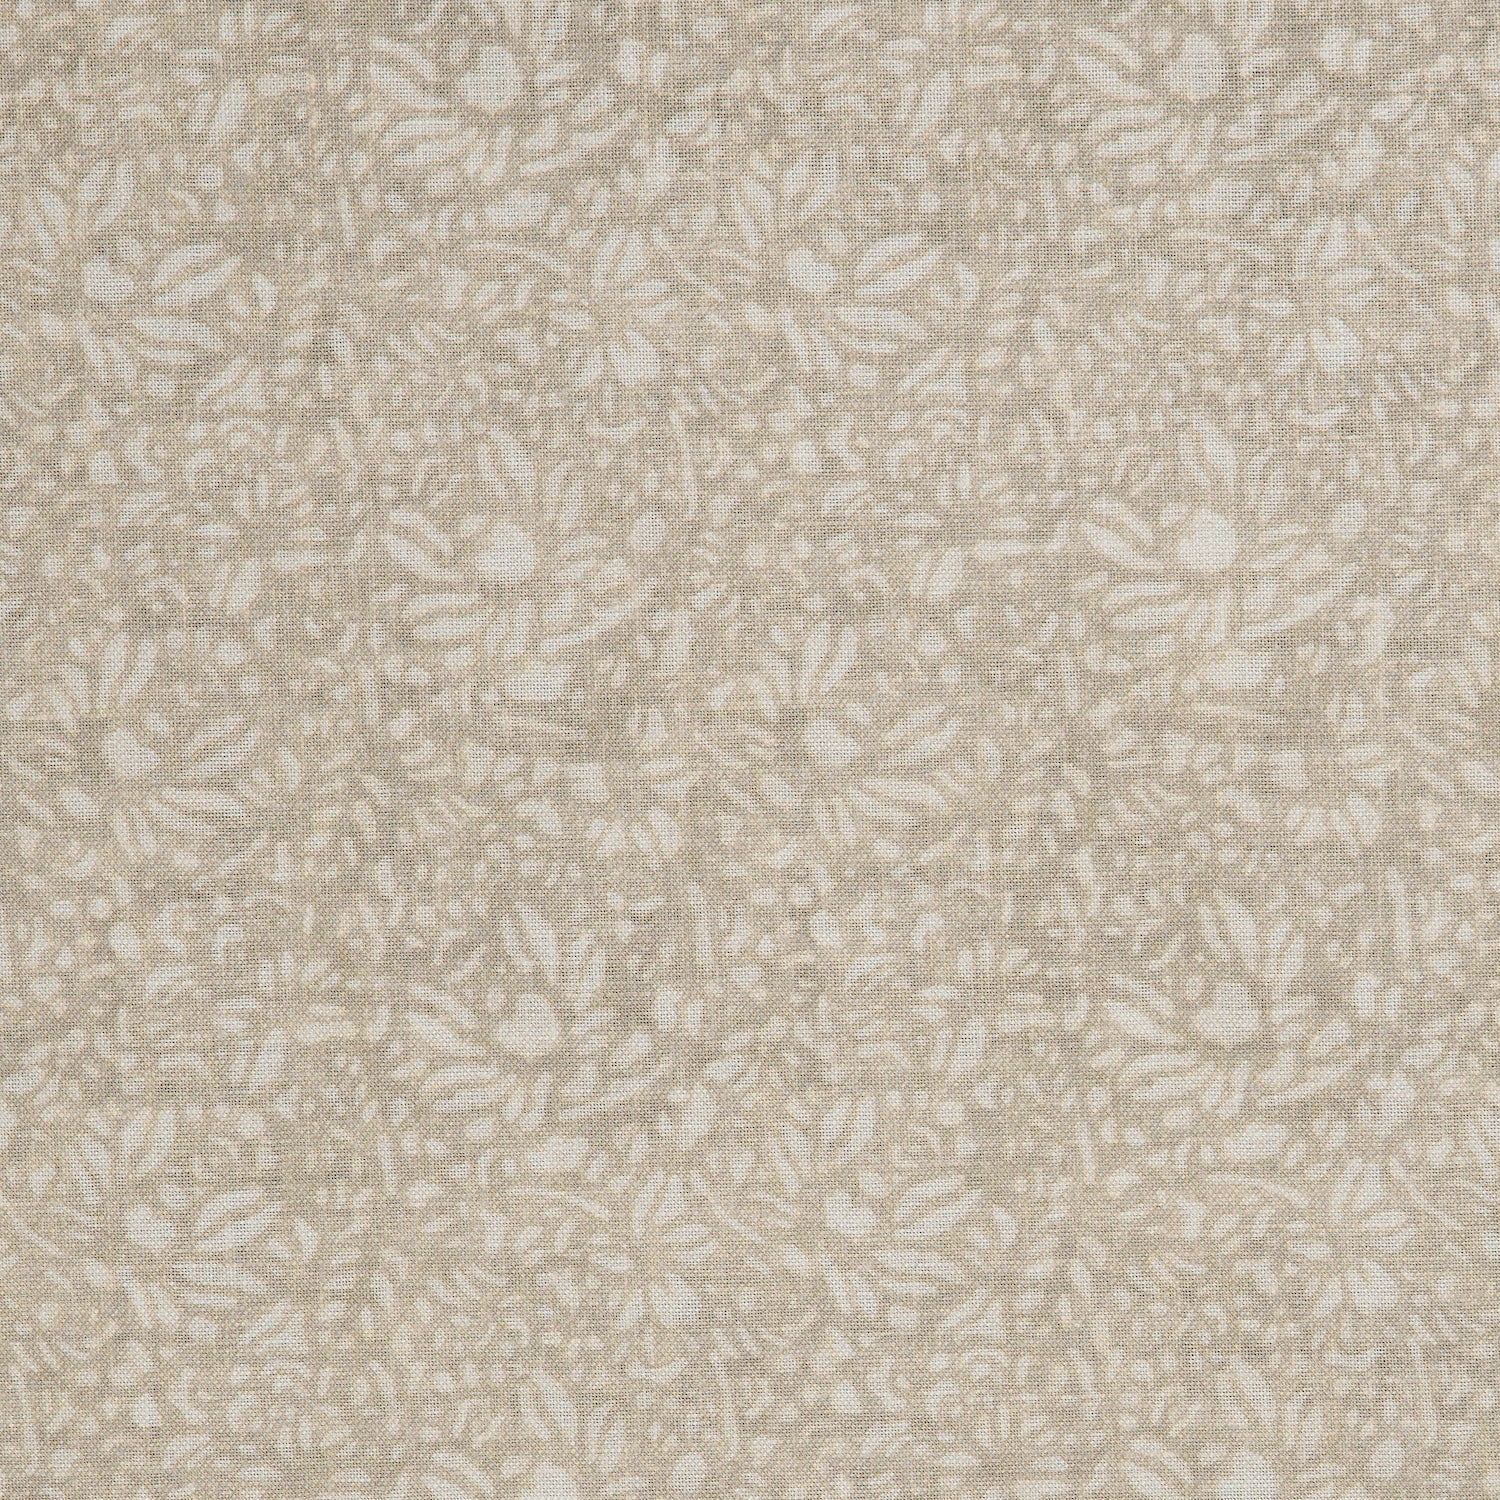 Detail of a printed linen fabric in a repeating chrysanthemum pattern in white on a cream field.